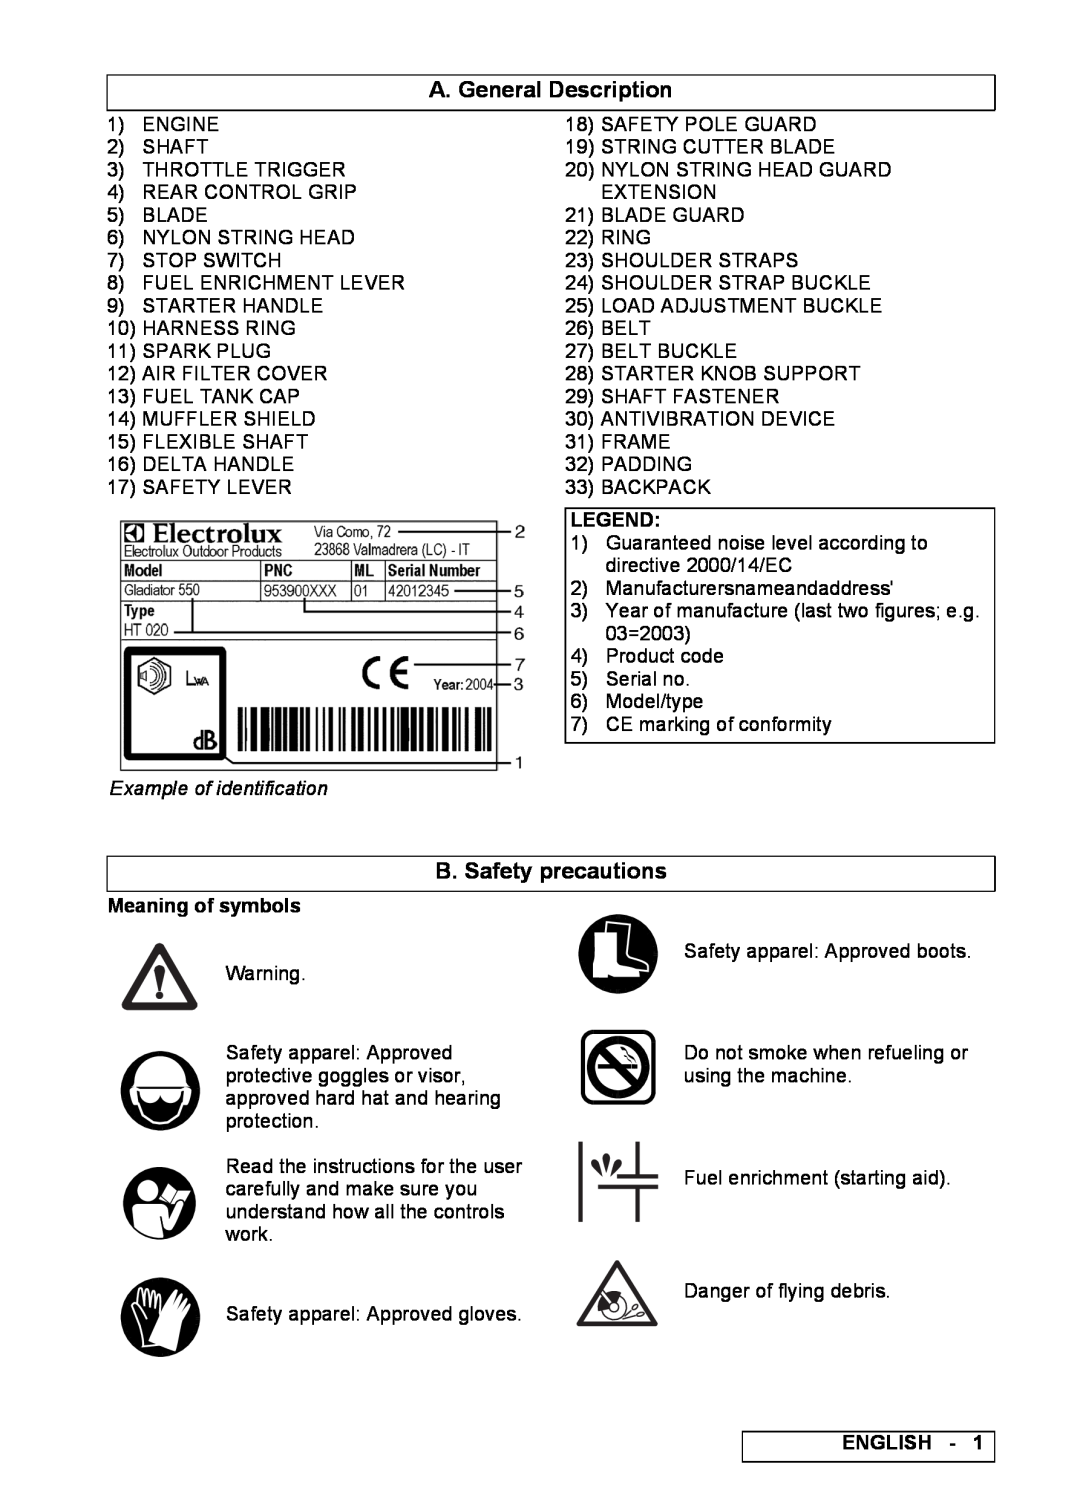 Electrolux 4230X BP, 52 BP PRO, 95390039300 manual A. General Description, B. Safety precautions, Meaning of symbols, English 